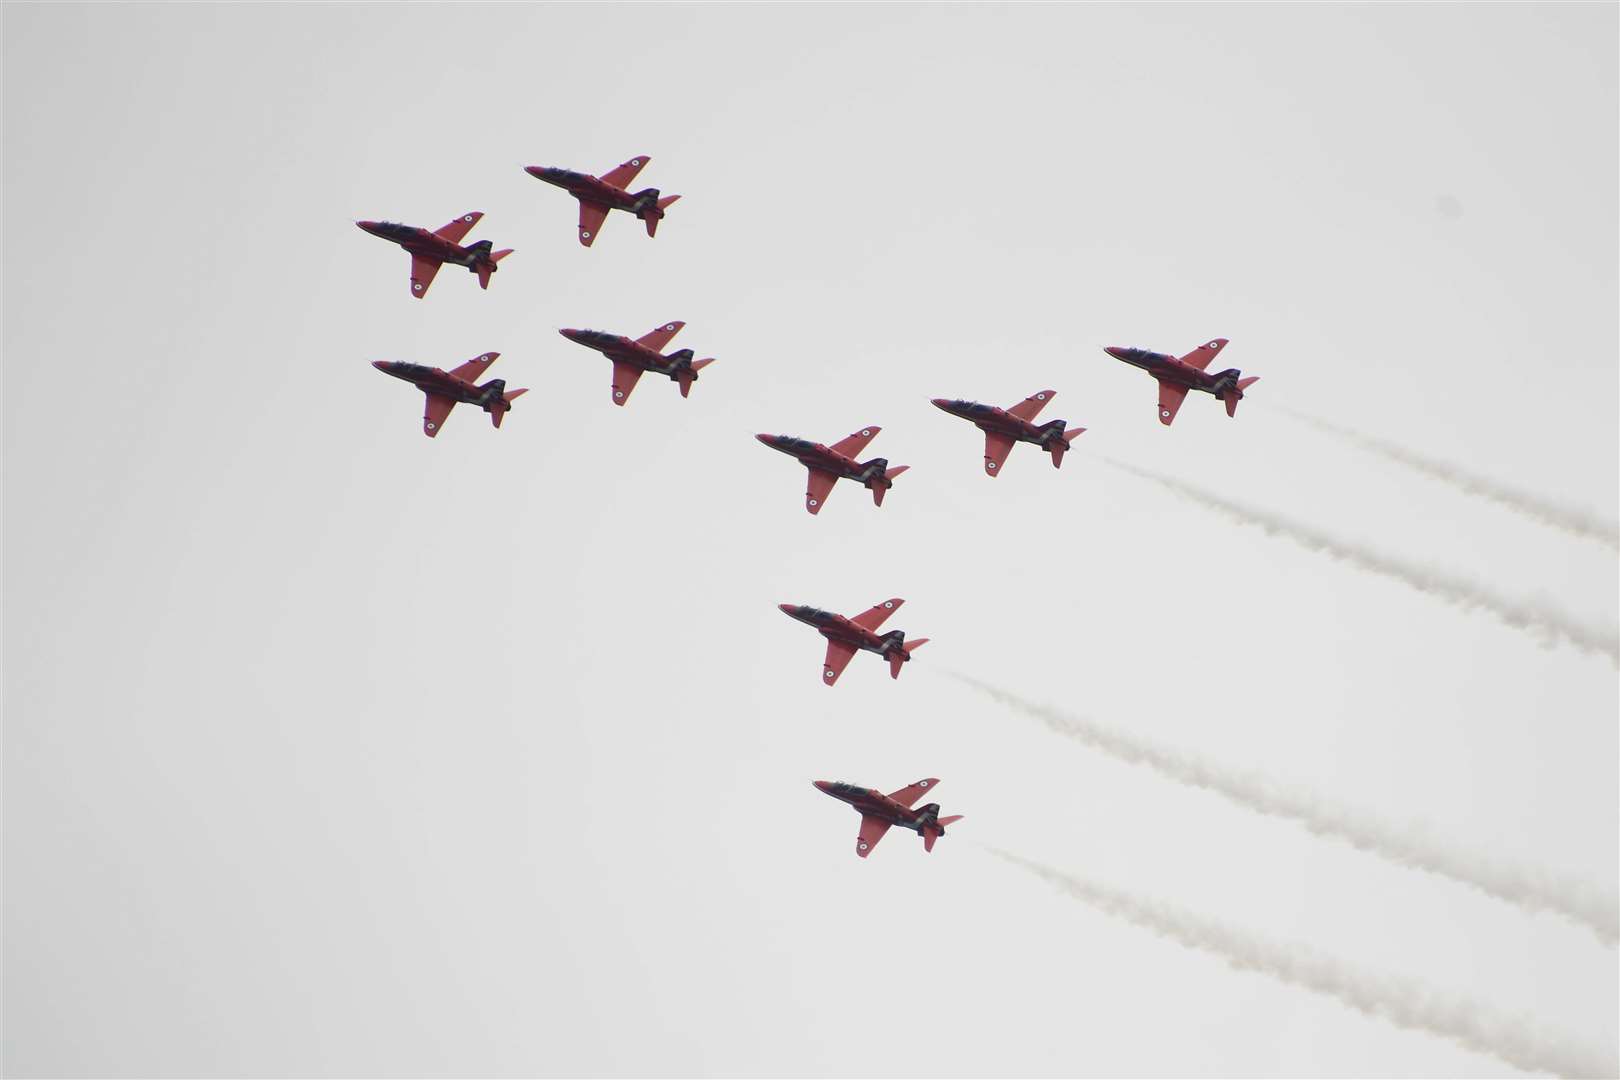 The Red Arrows return to The Leas this weekend. Picture: Paul Amos